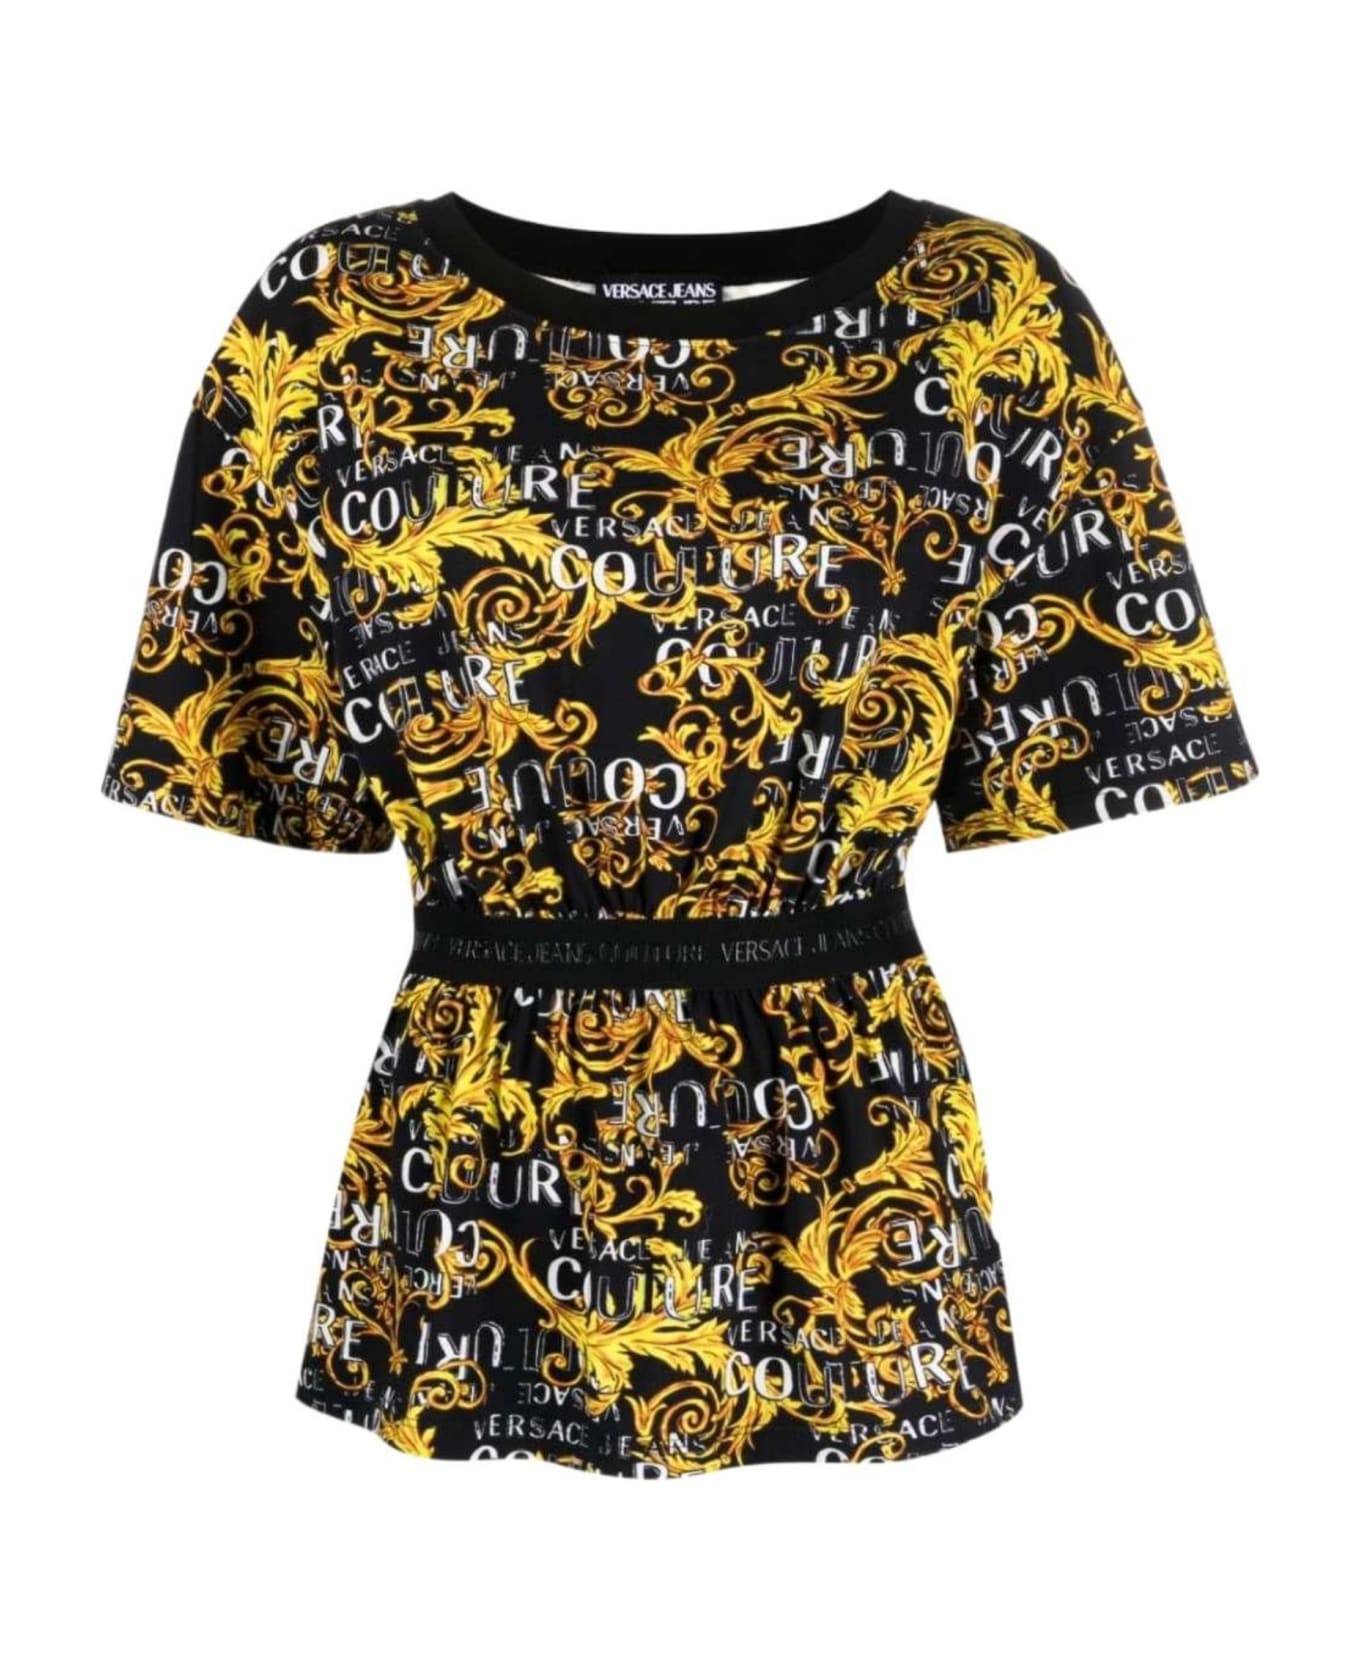 Versace Jeans Couture T-shirt - 899 + 948